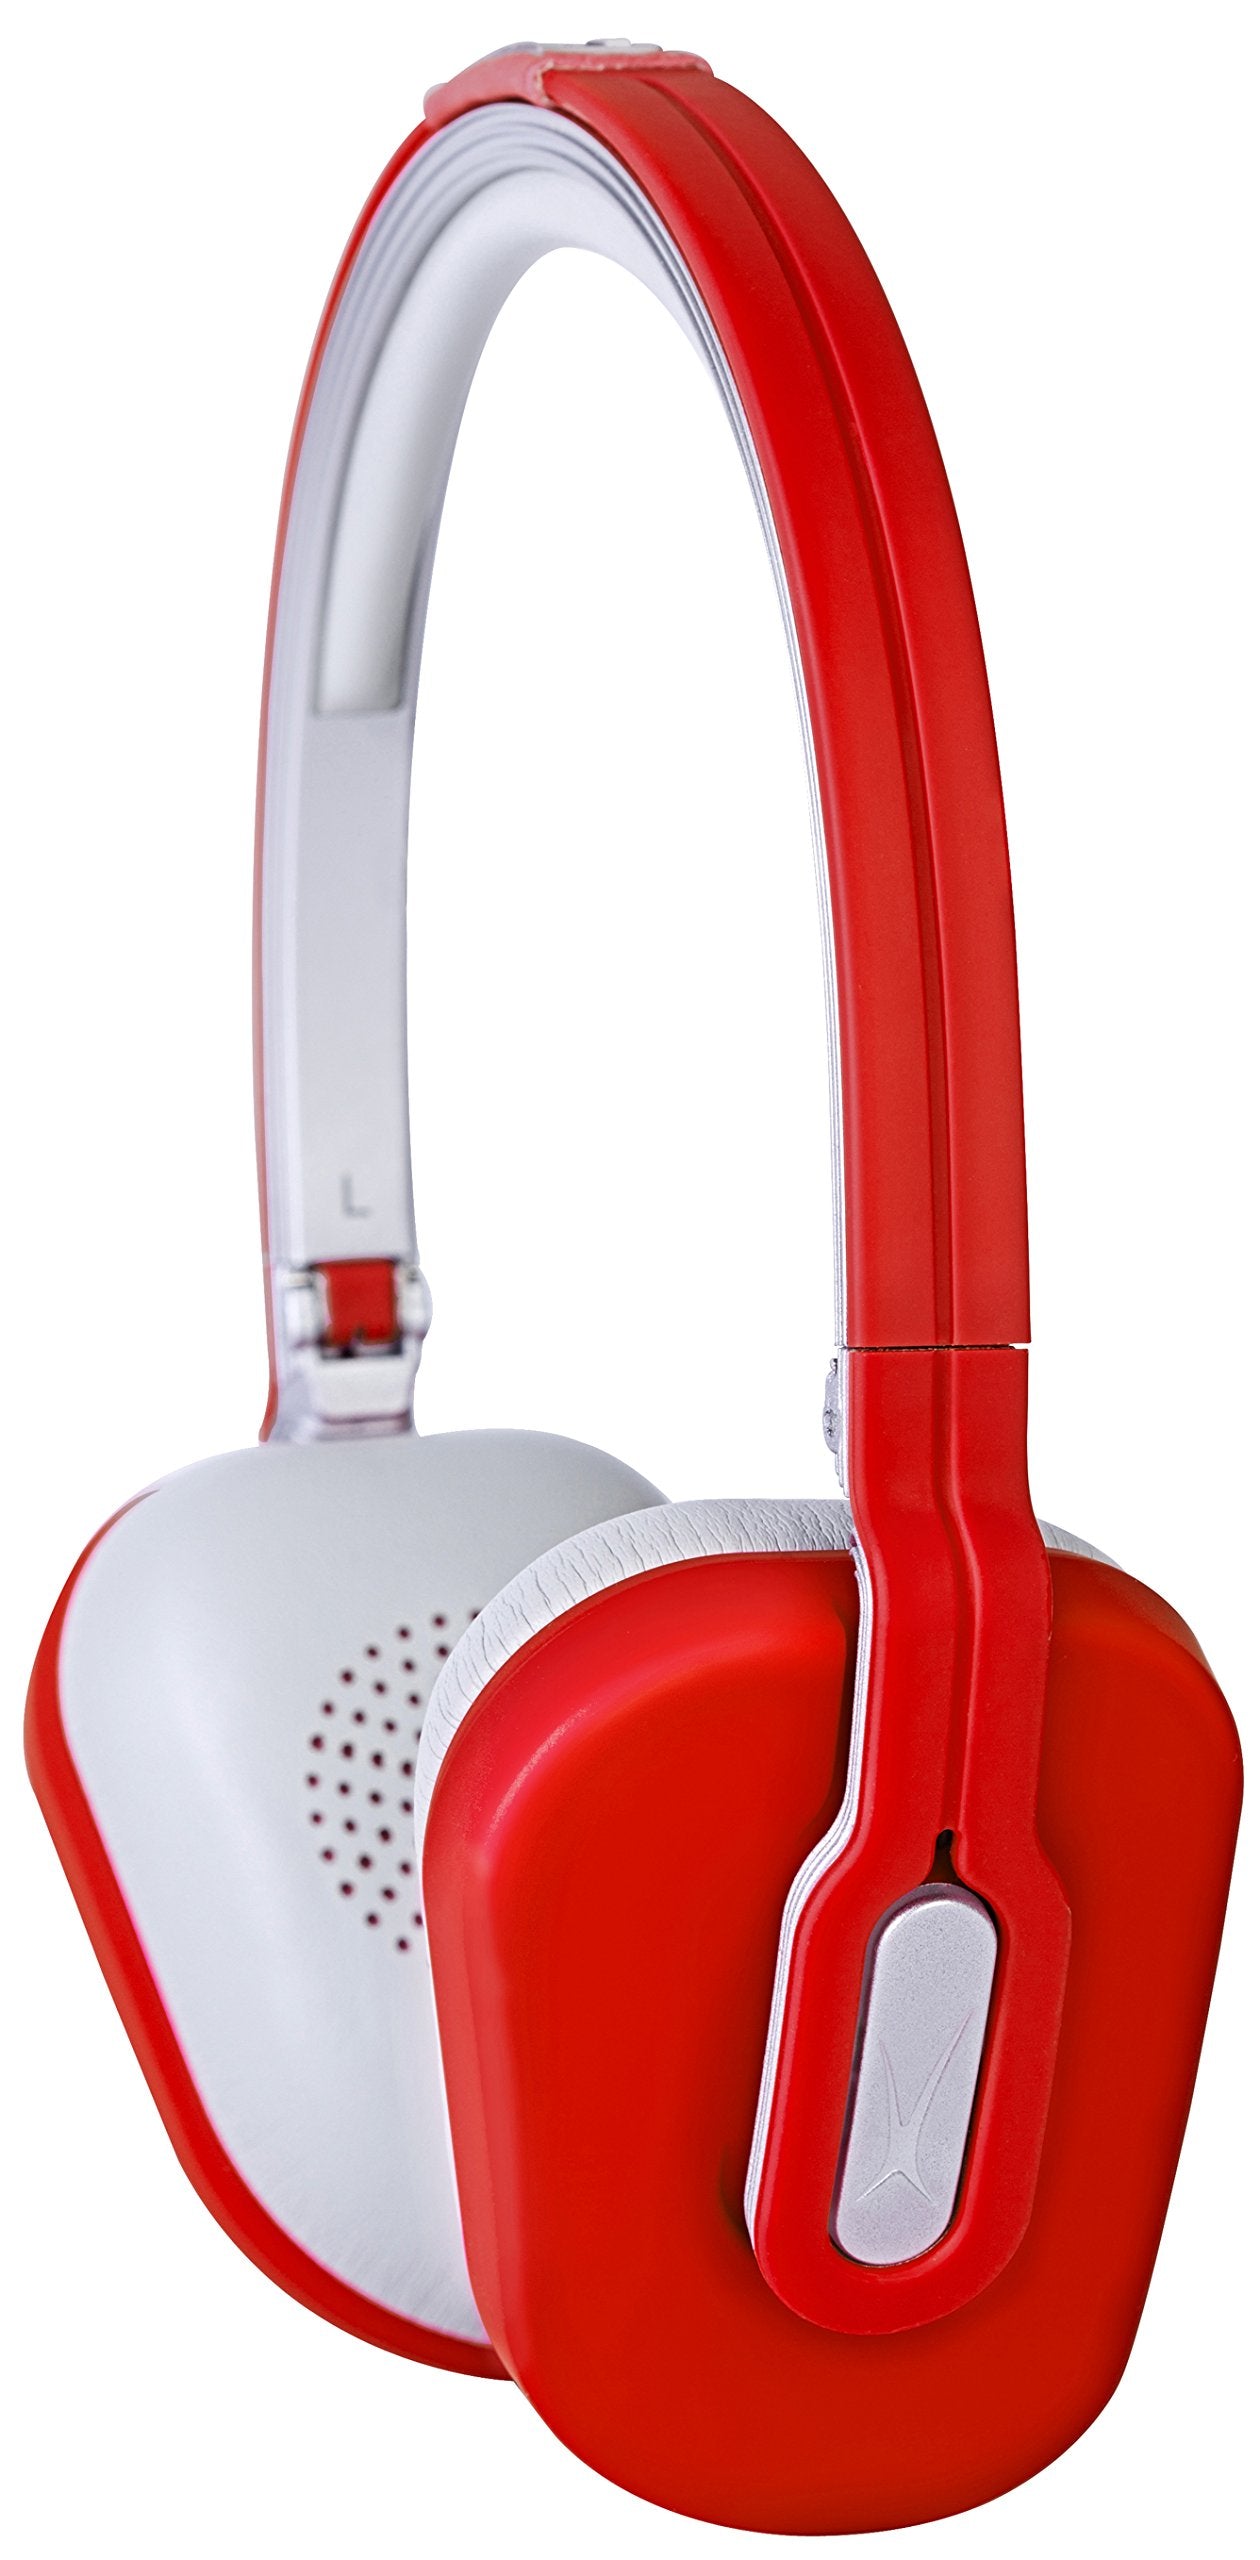 Altec Lansing Over the Head Foldable Headphone with Mic, Red - MZX662